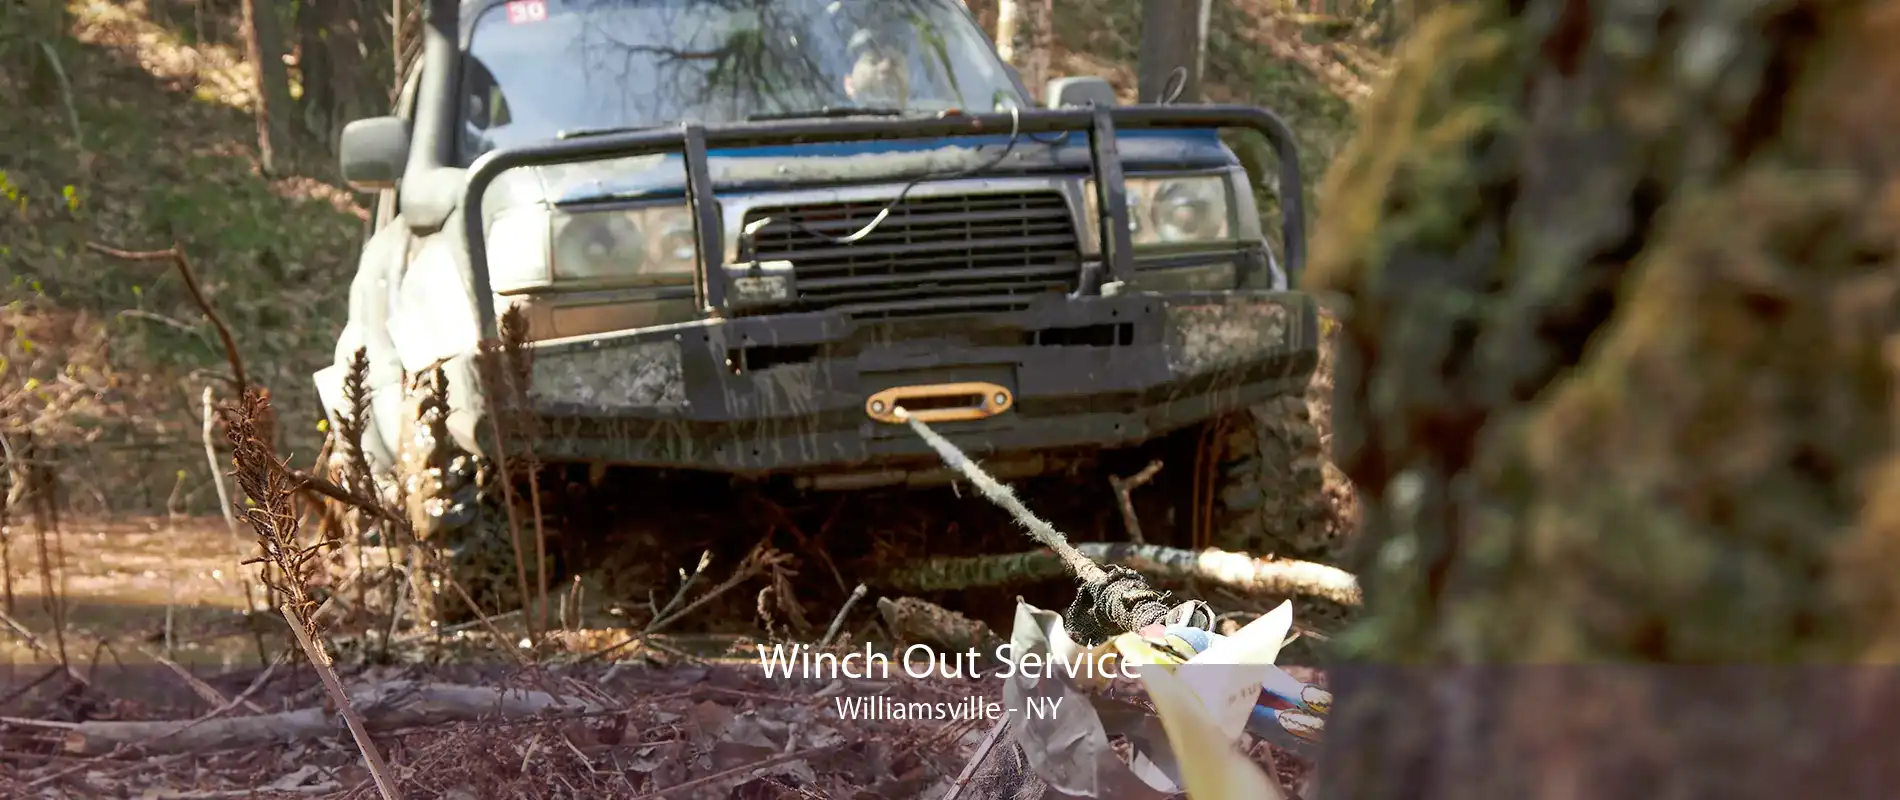 Winch Out Service Williamsville - NY